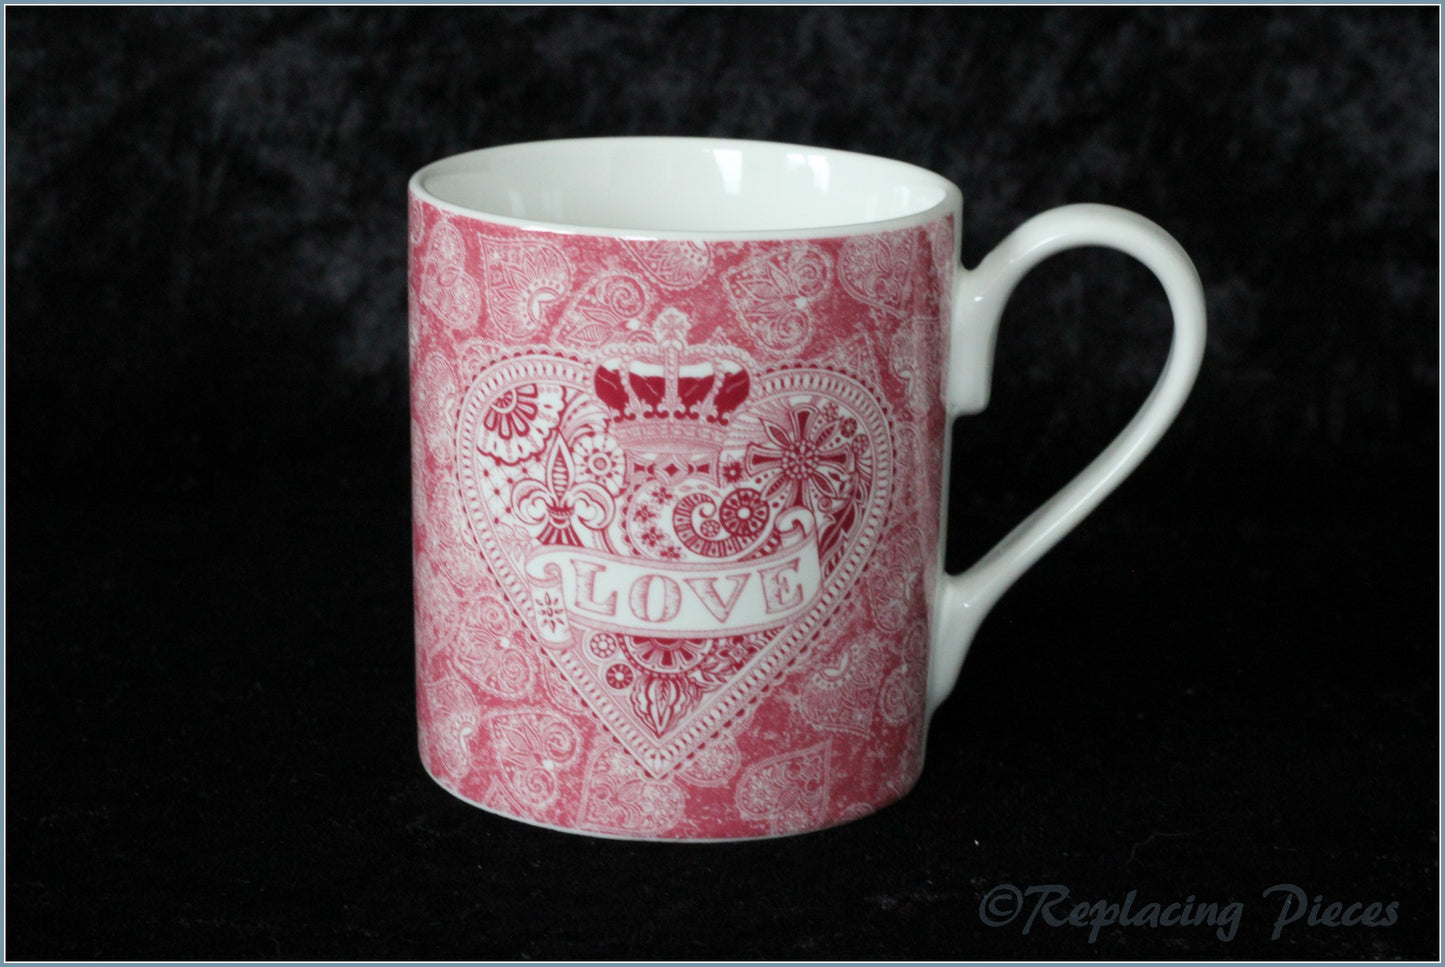 Queens - Made With Love - Mug (Full Pink Pattern)